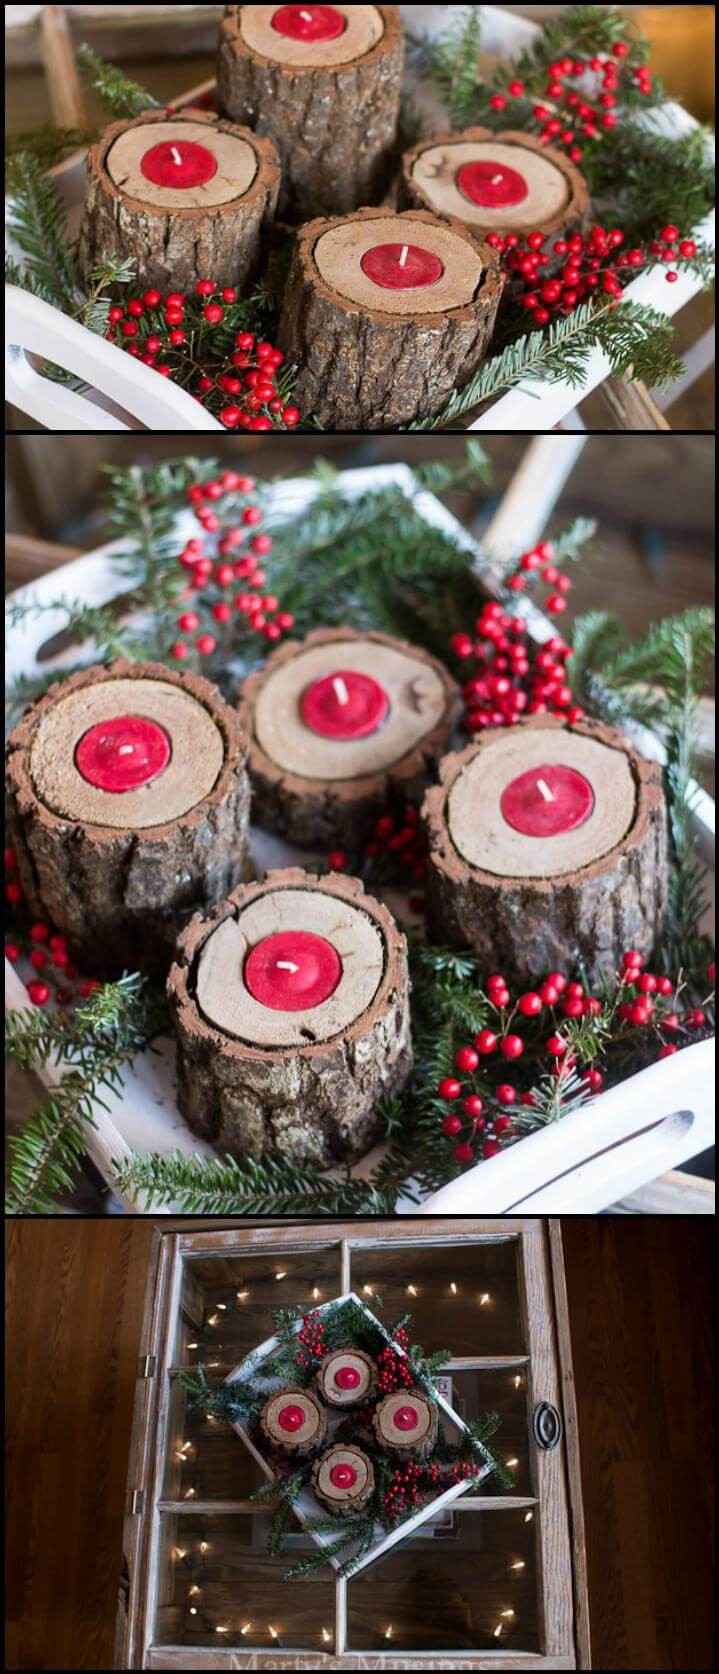 DIY Wood Candle Holders
 50 DIY Candle Holders and Votives You Can Do Page 3 of 5